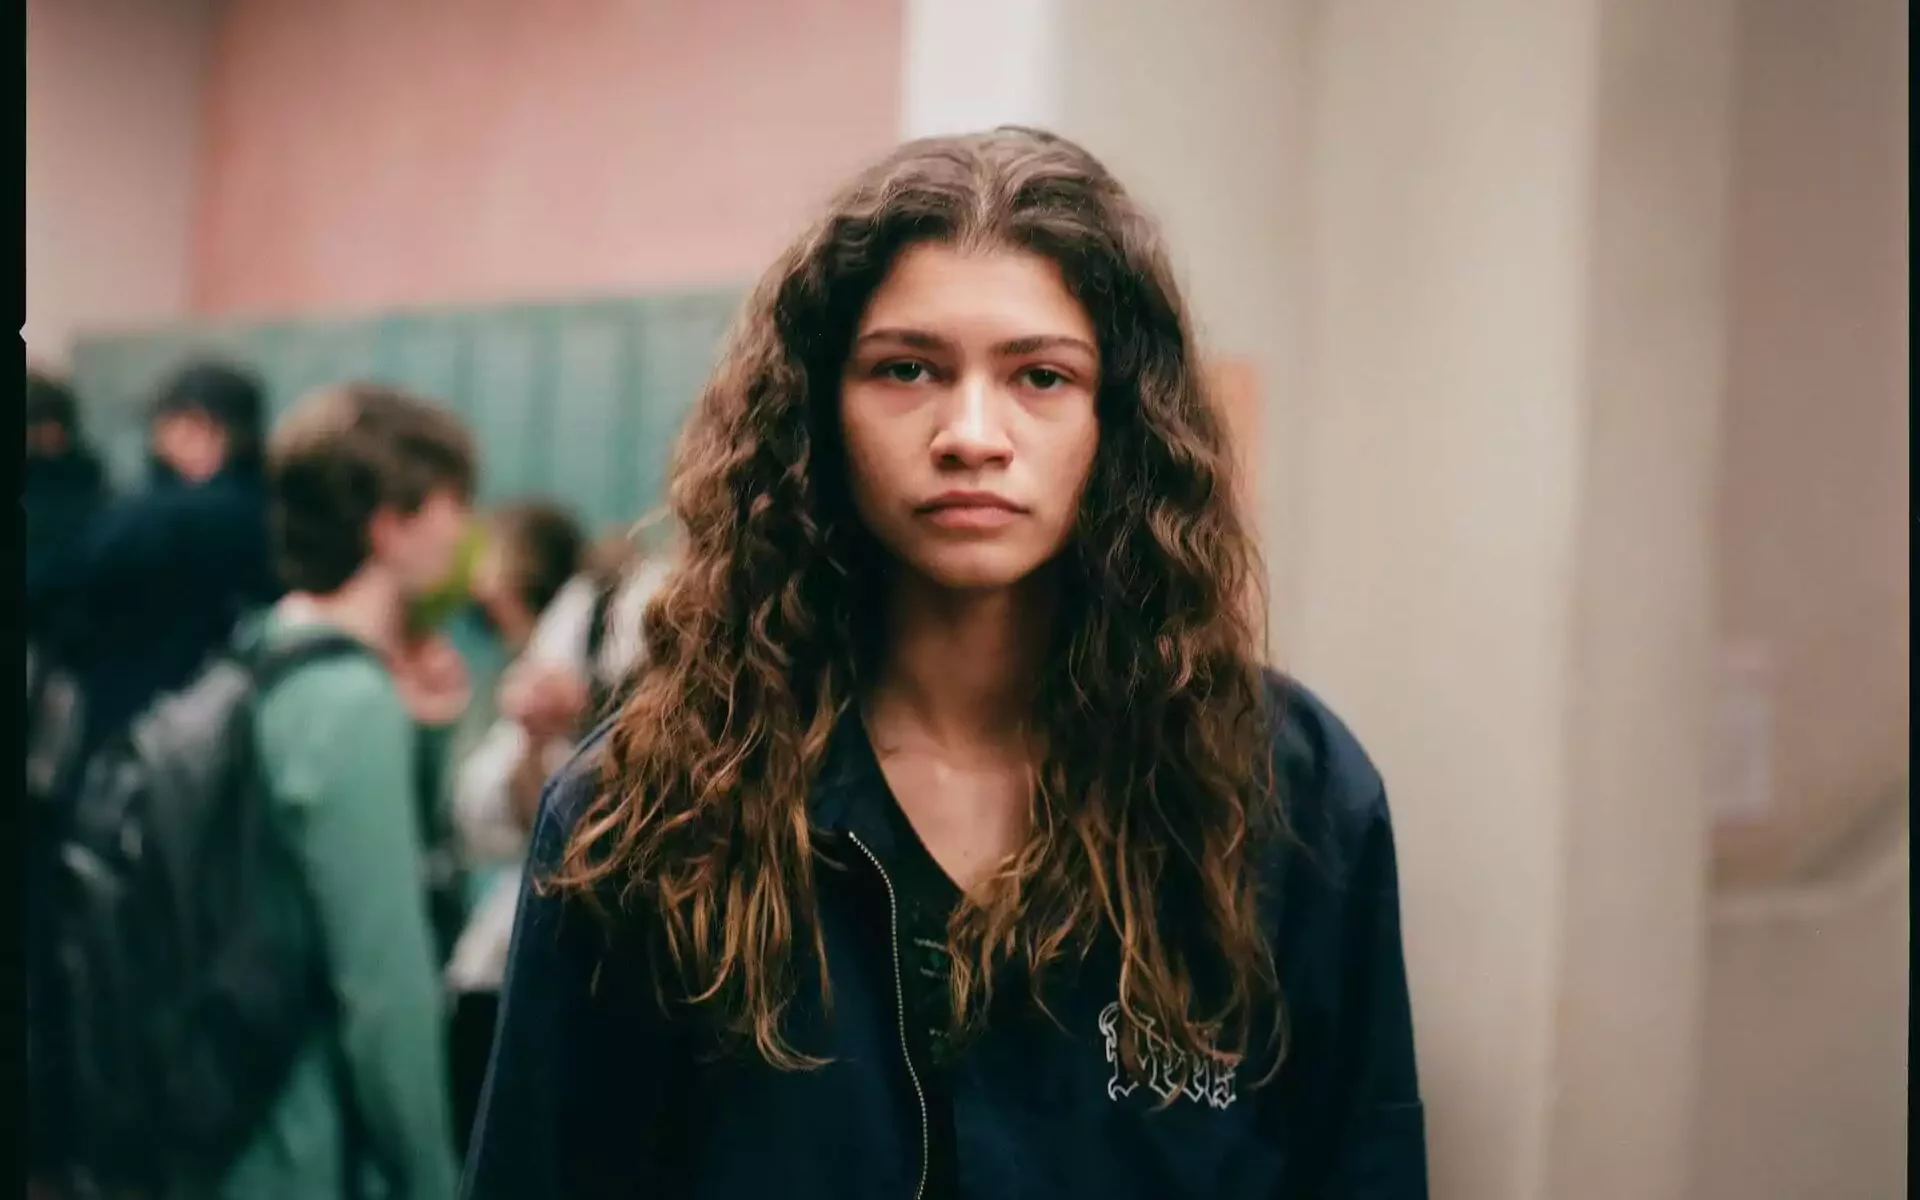 Zendaya Movies And Shows | The Film And TV Journey Of Zendaya So Far